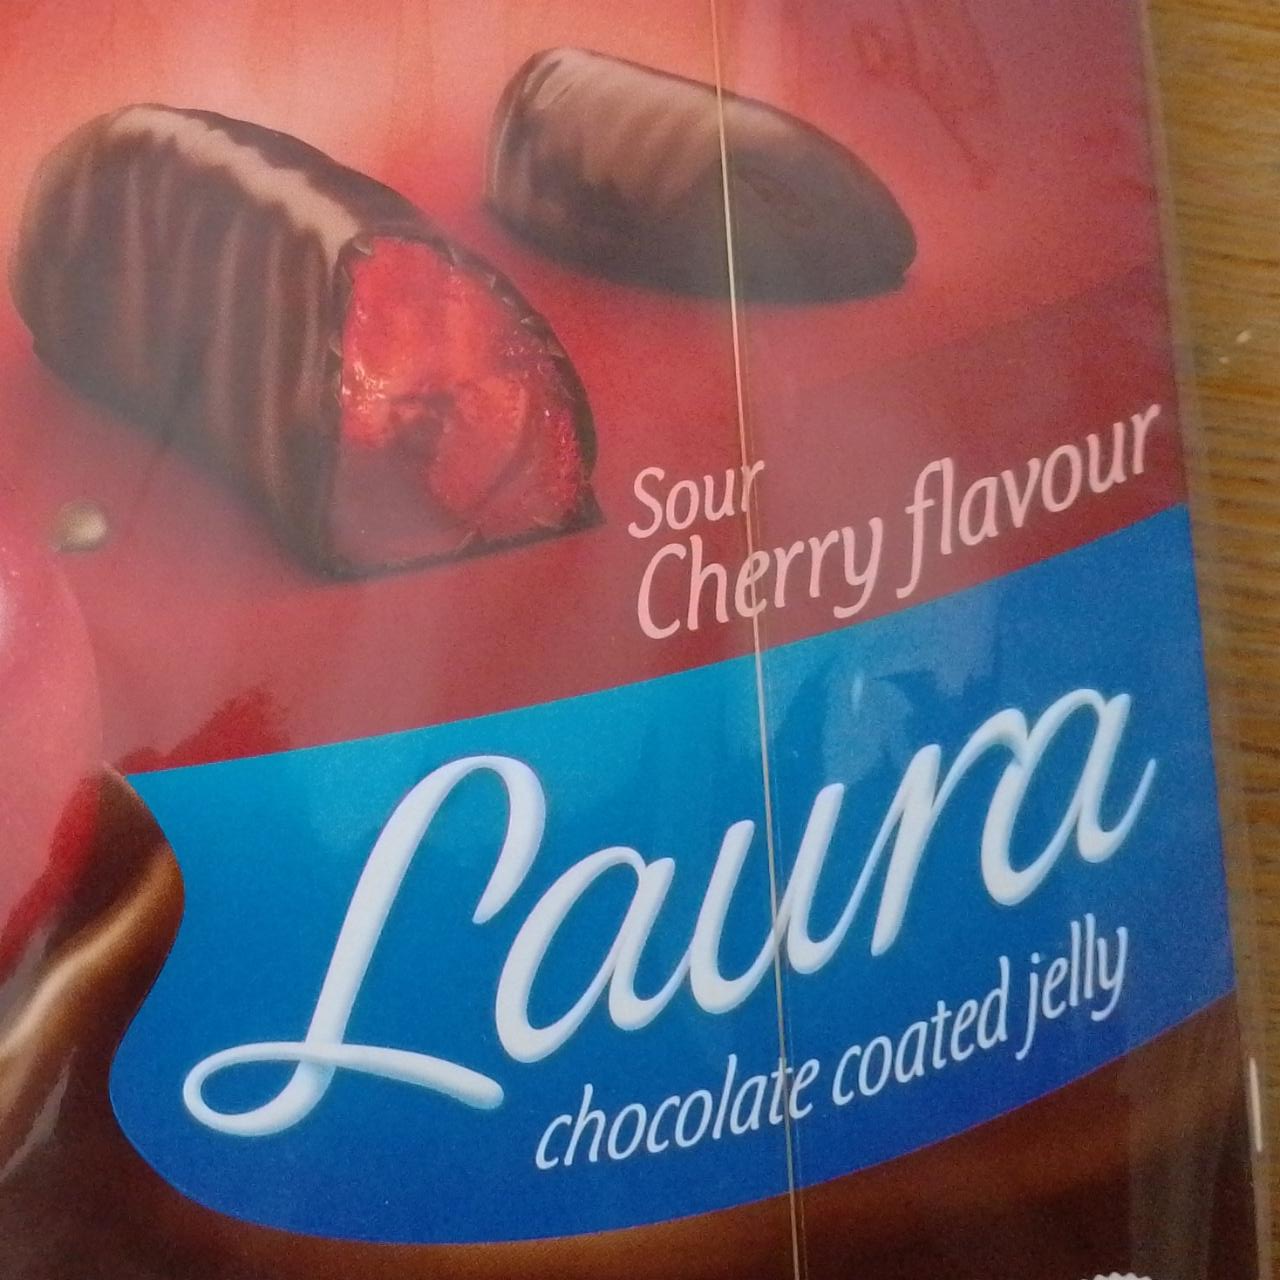 Zdjęcia - Sour cherry flavour chocolate coated jelly Laura Lidl